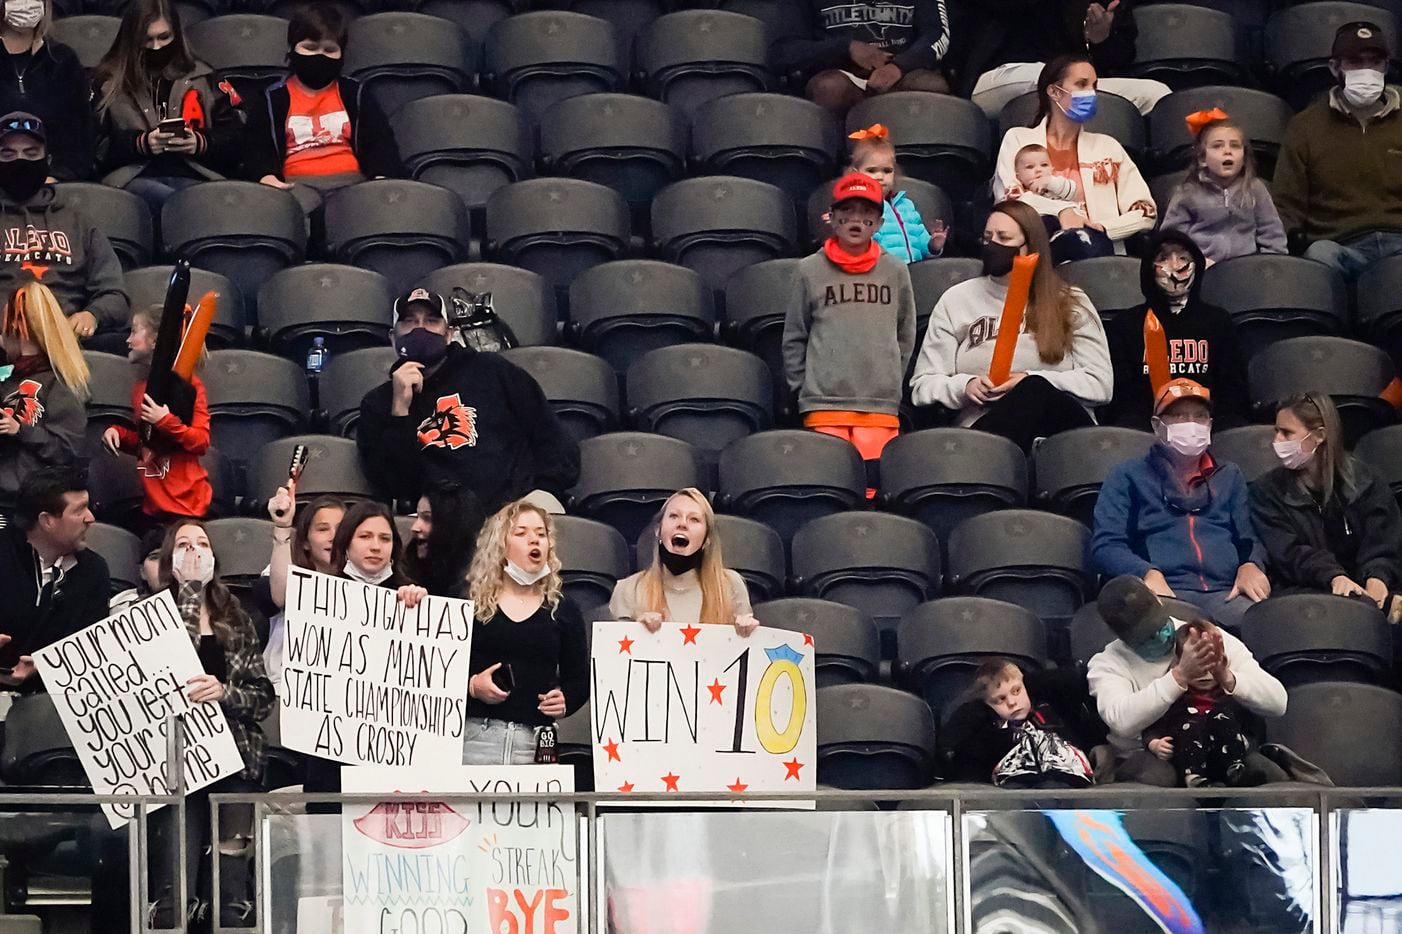 Aledo fans cheer their team, hoping for a 10th state title, during the first half of the Class 5A Division II state football championship game against Crosby at AT&T Stadium on Friday, Jan. 15, 2021, in Arlington. (Smiley N. Pool/The Dallas Morning News)